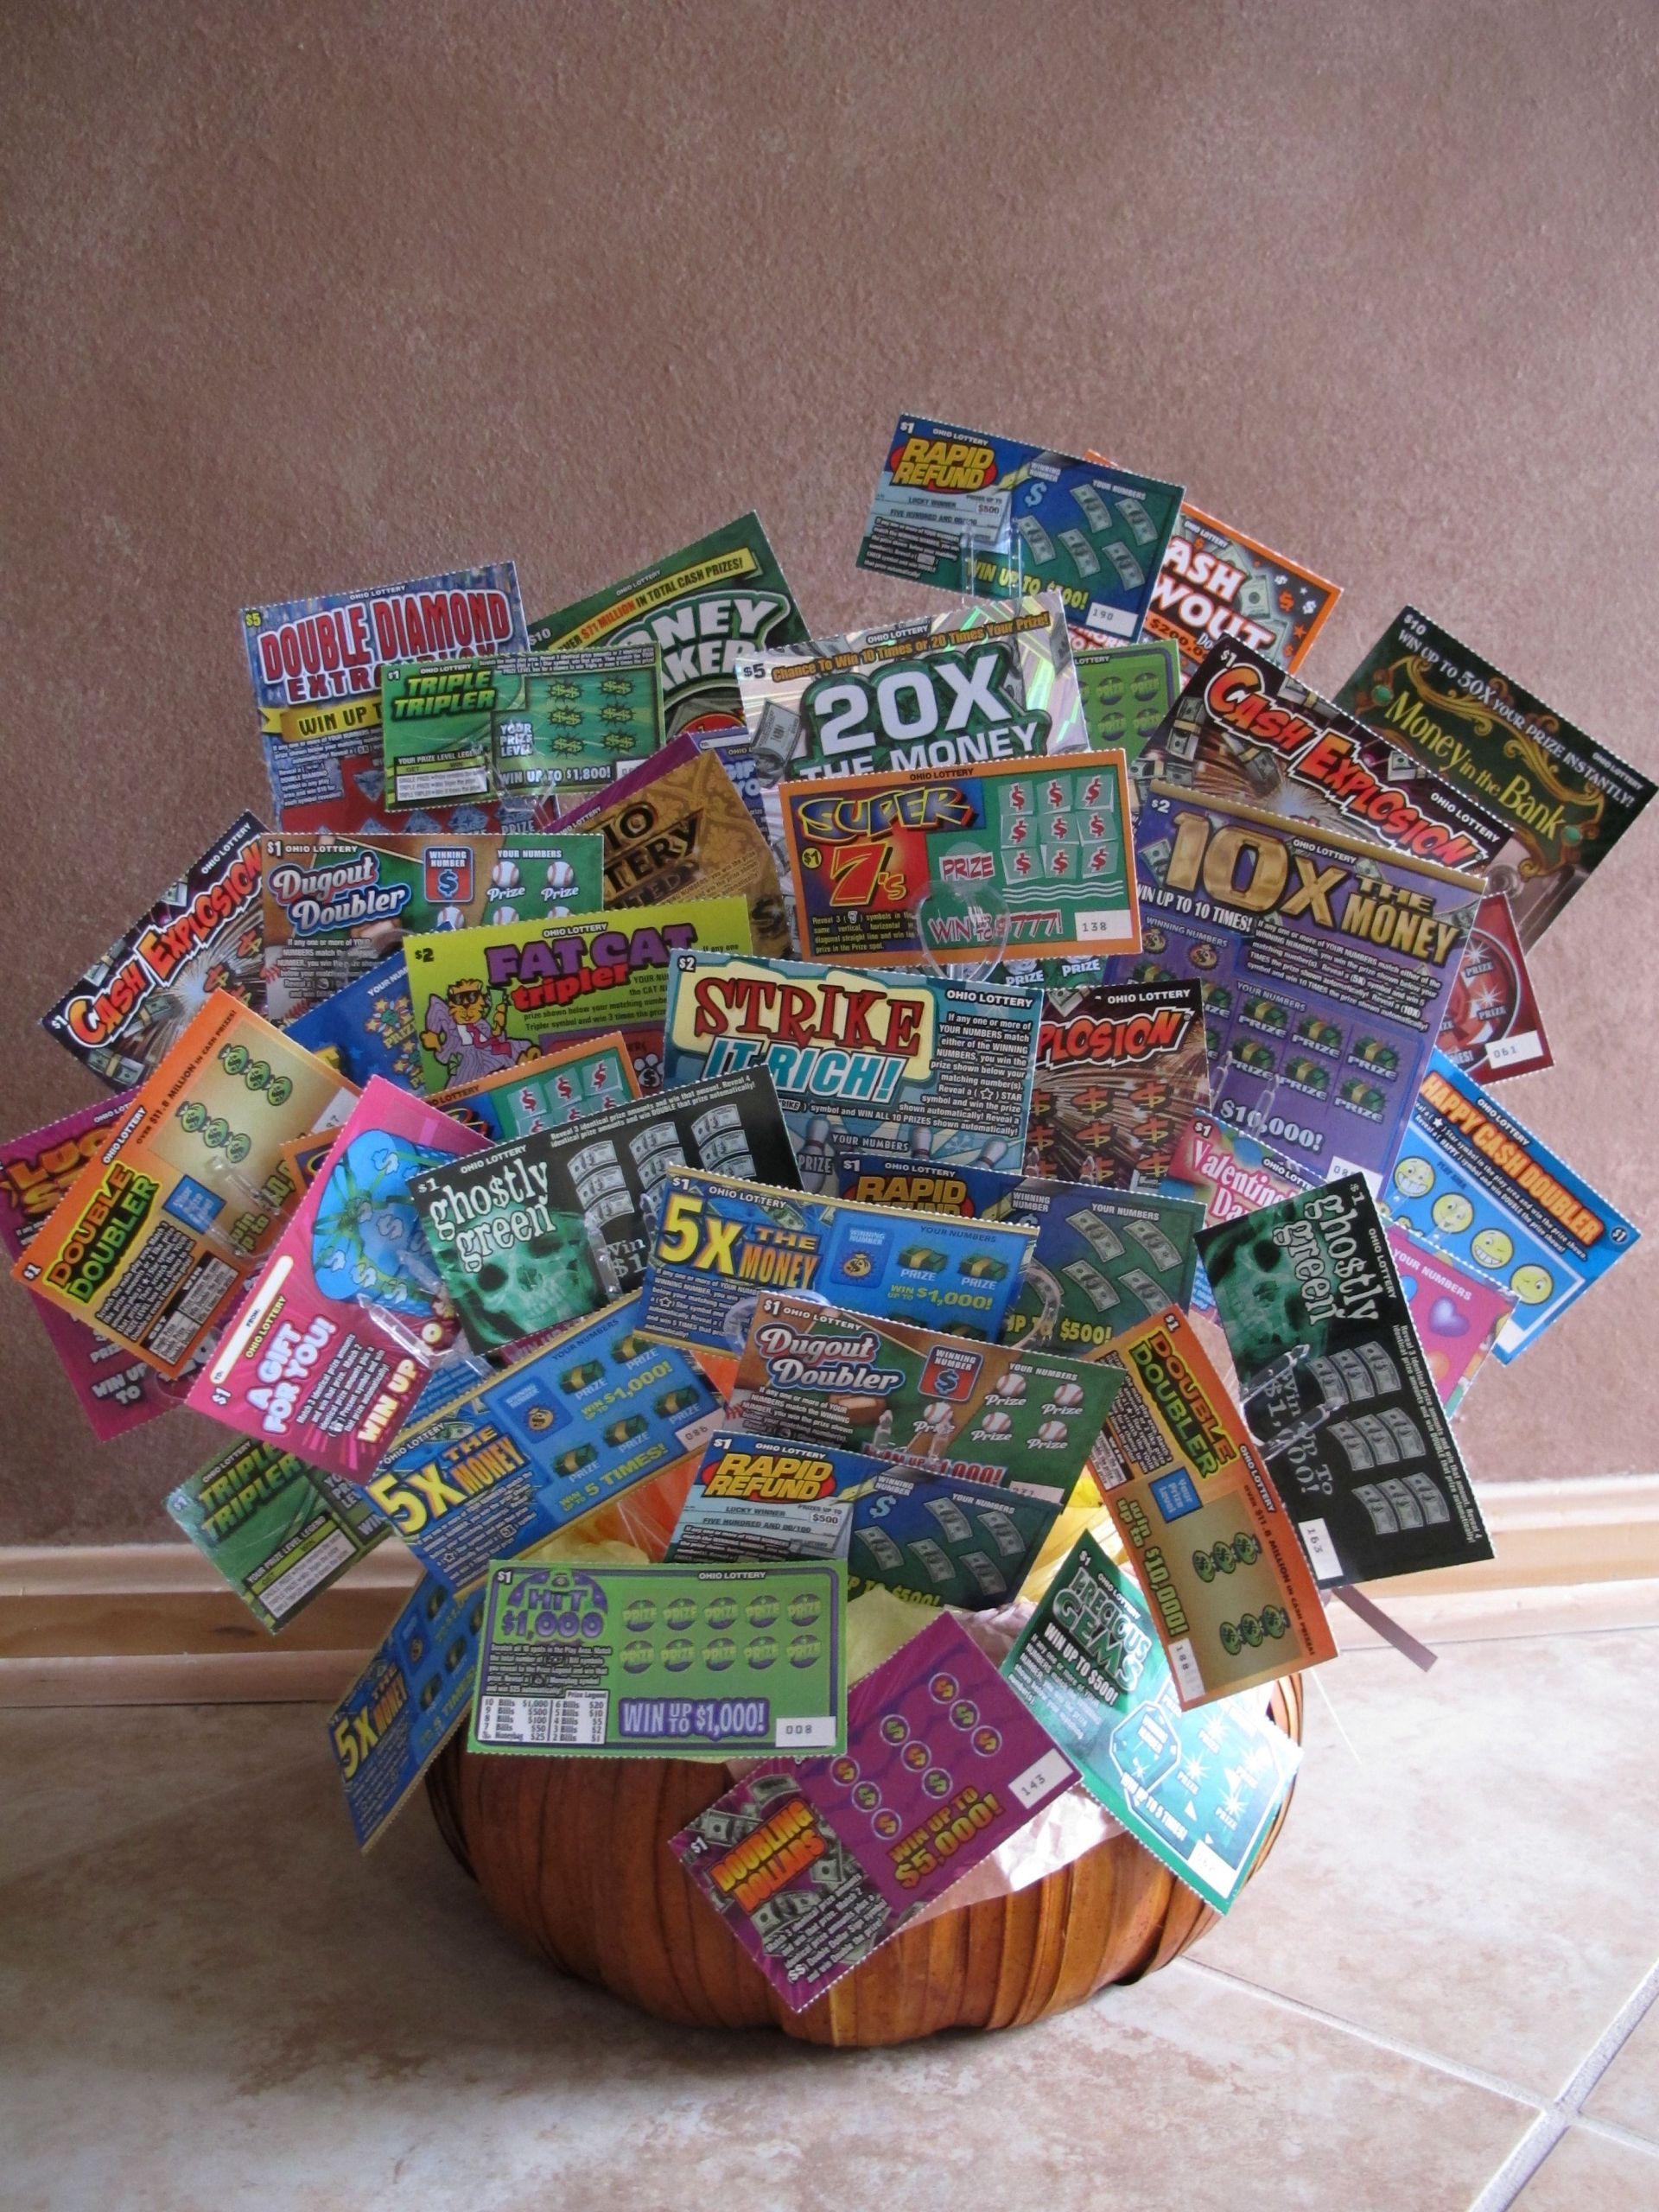 Lottery Gift Basket Ideas
 $100 00 Illinois Lottery Instant Ticket Basket just one of